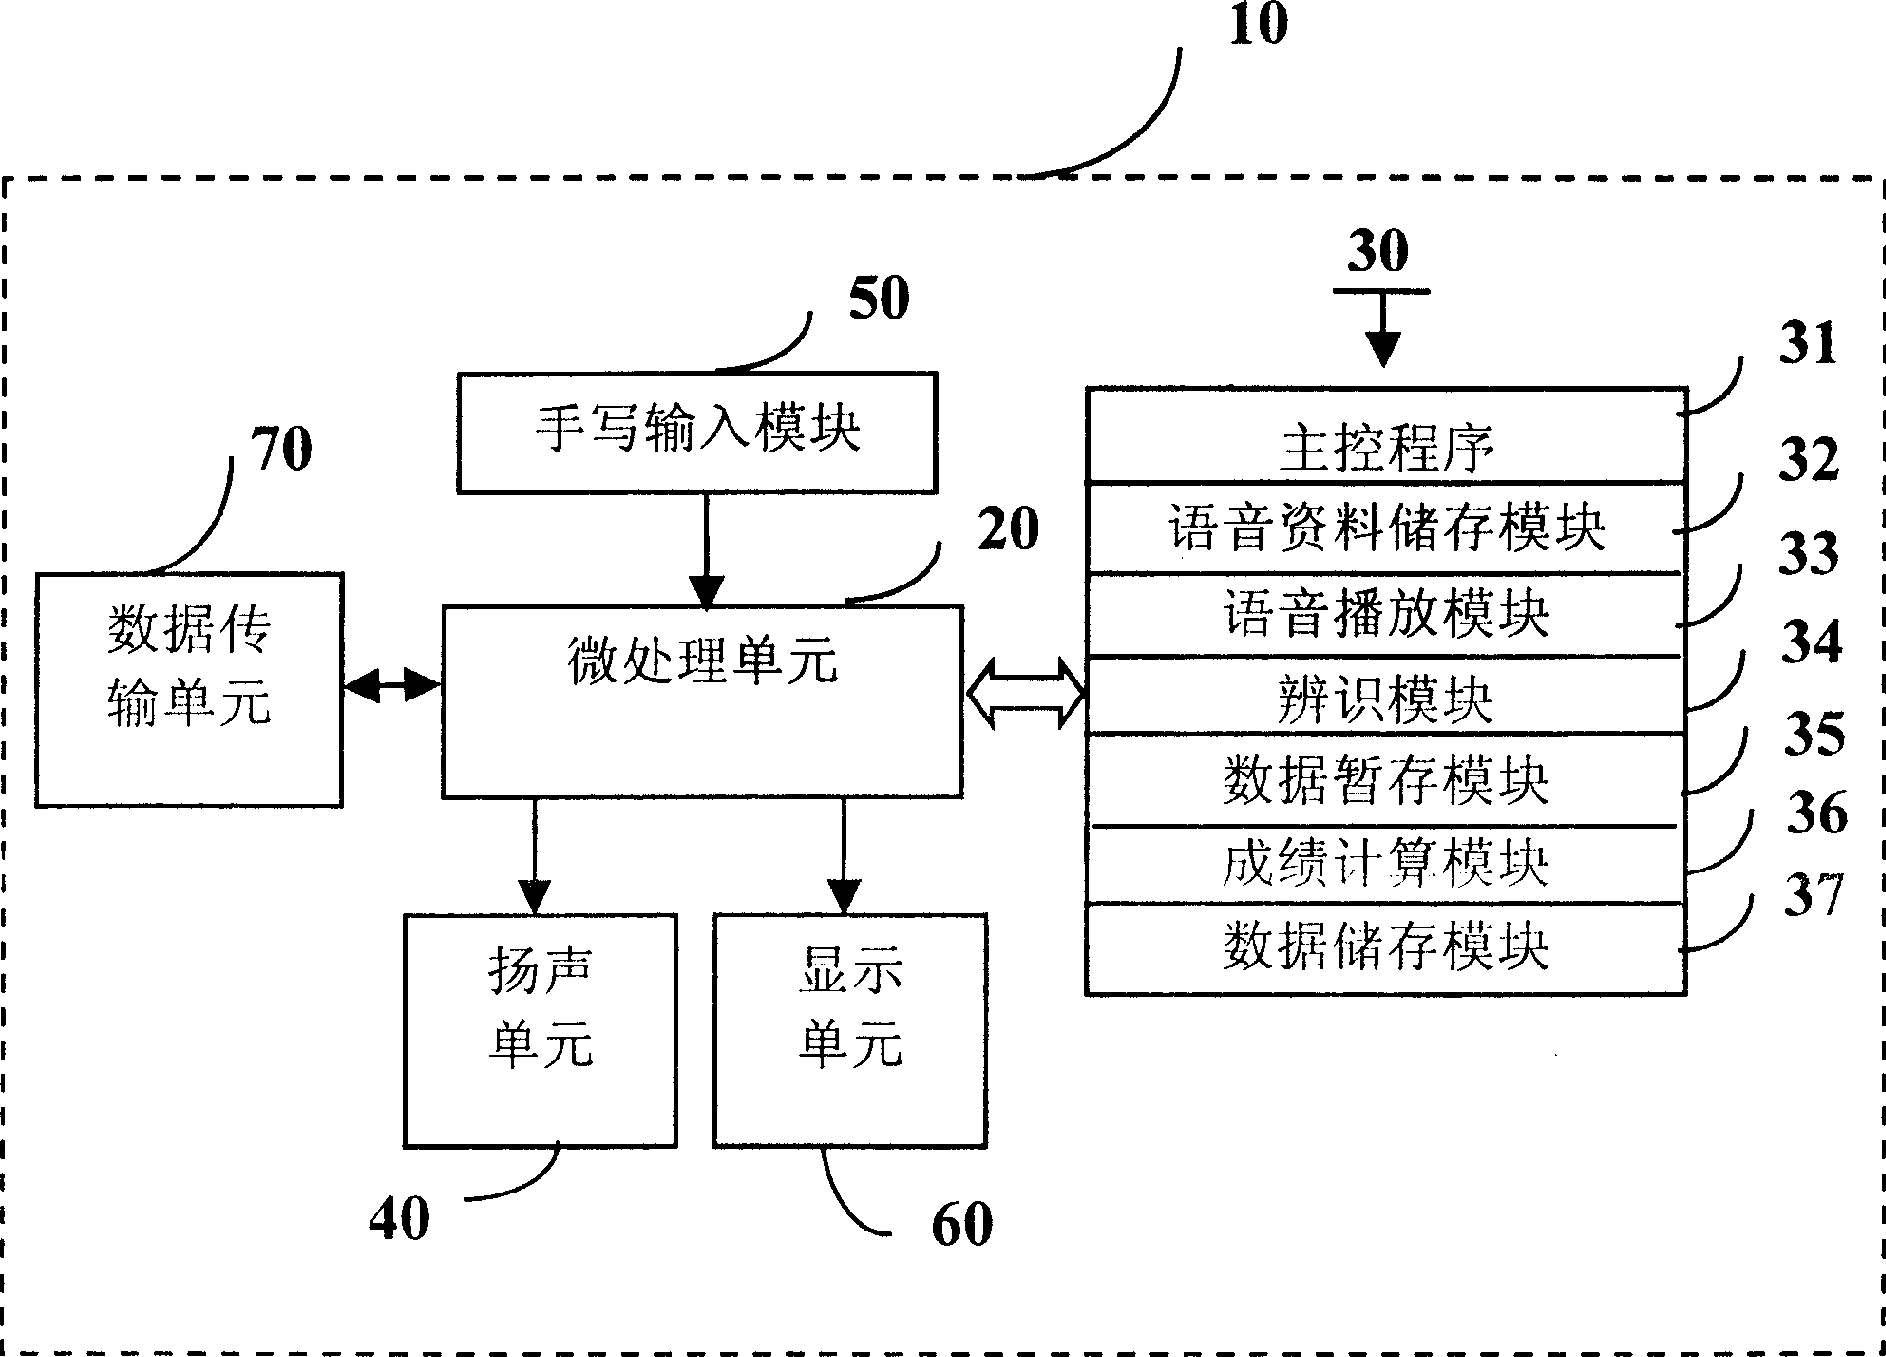 Device and operation for dictation test and automatic